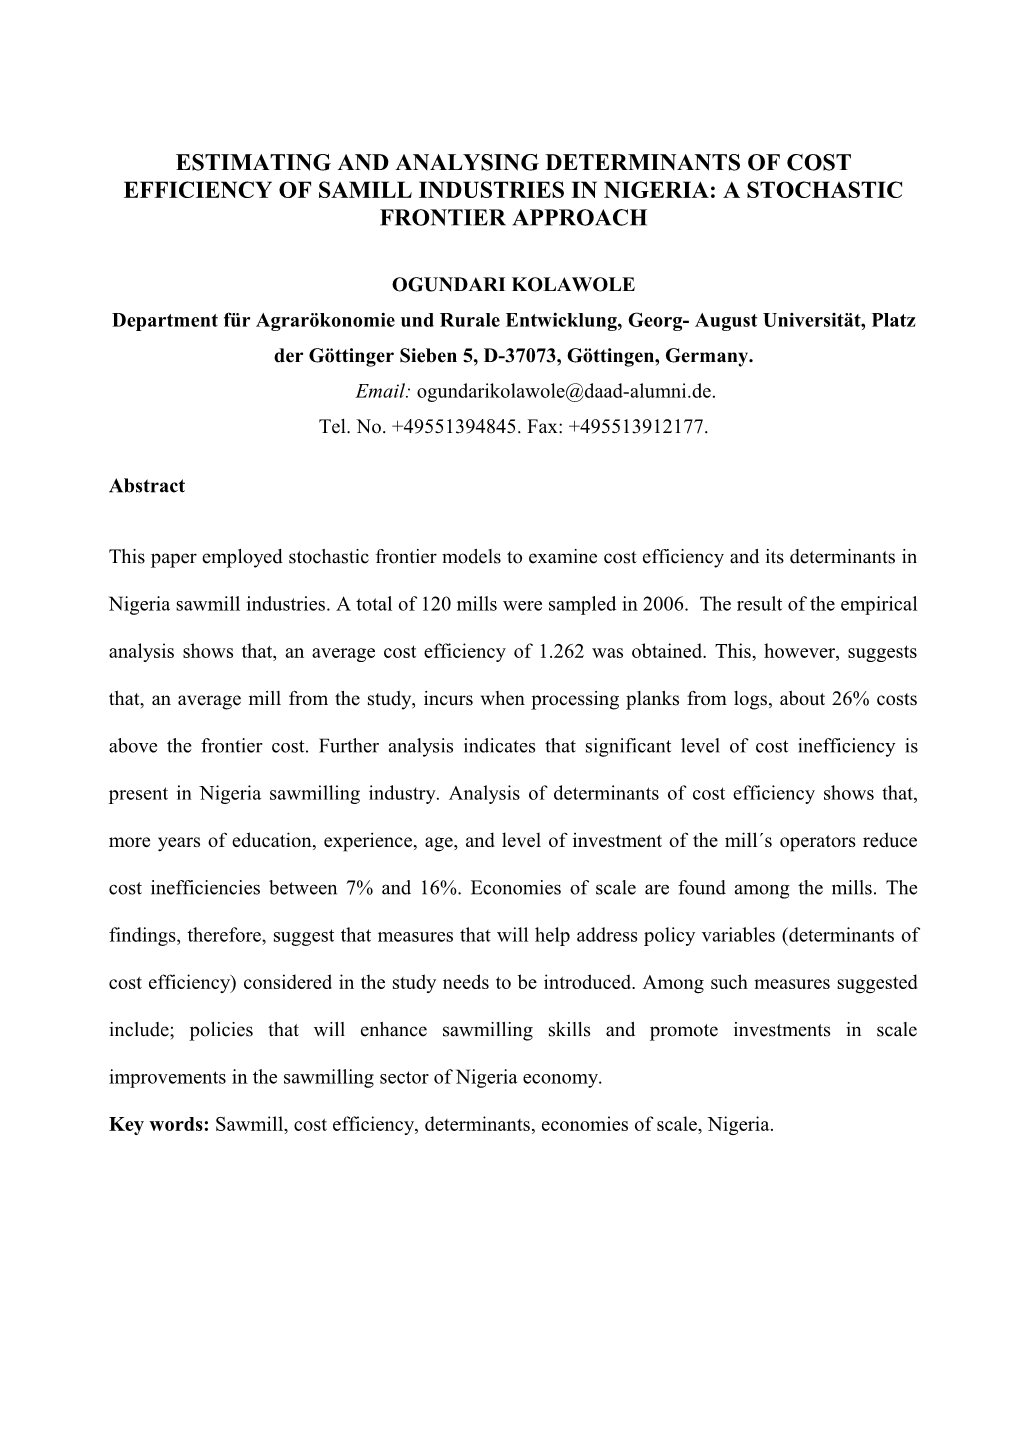 Measurement of Allocatrive Efficiency in Nigeria Sawmill Industry: a Stochastic Frontier